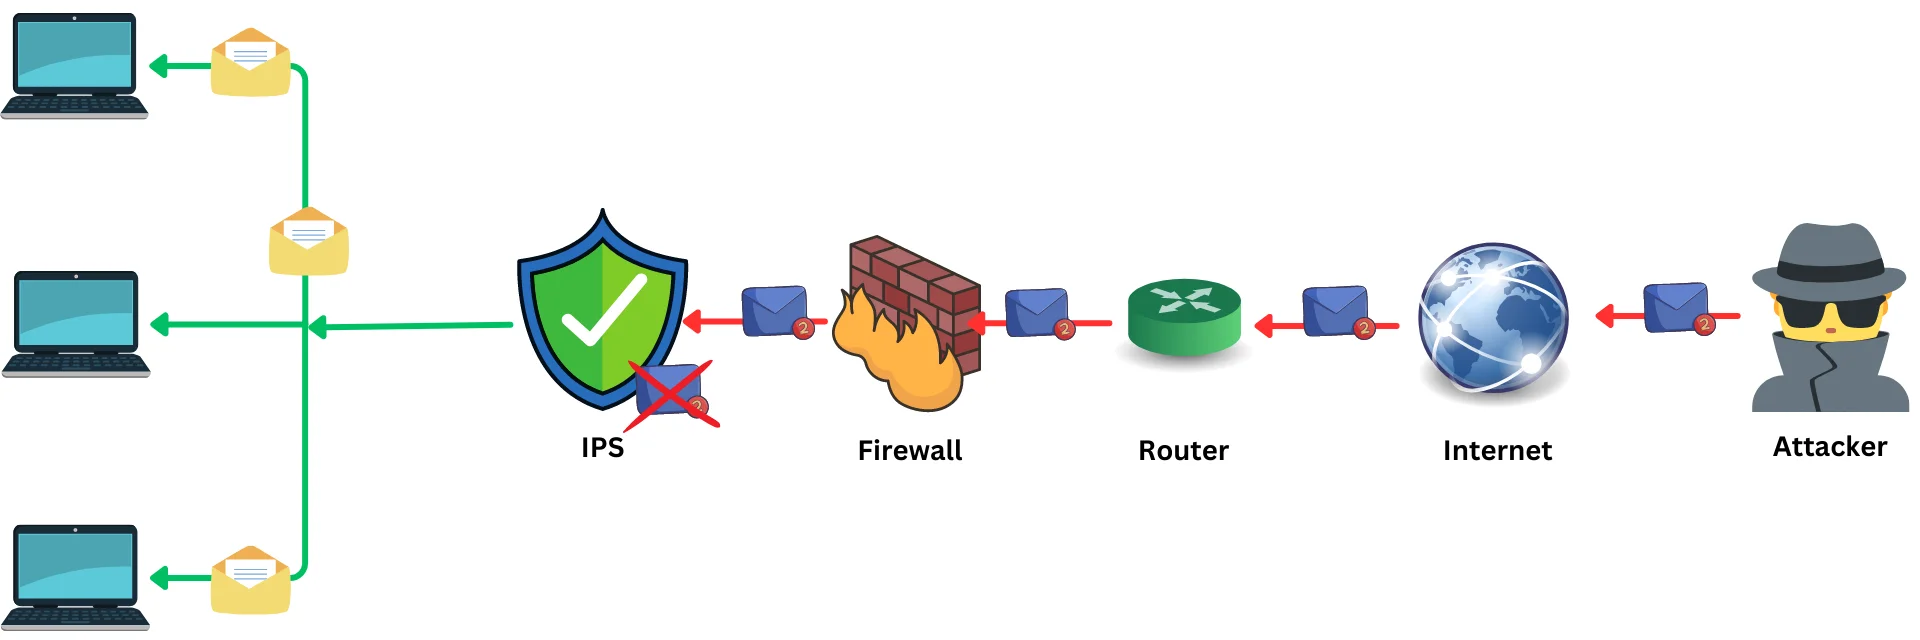 How Intrusion Prevention System Works